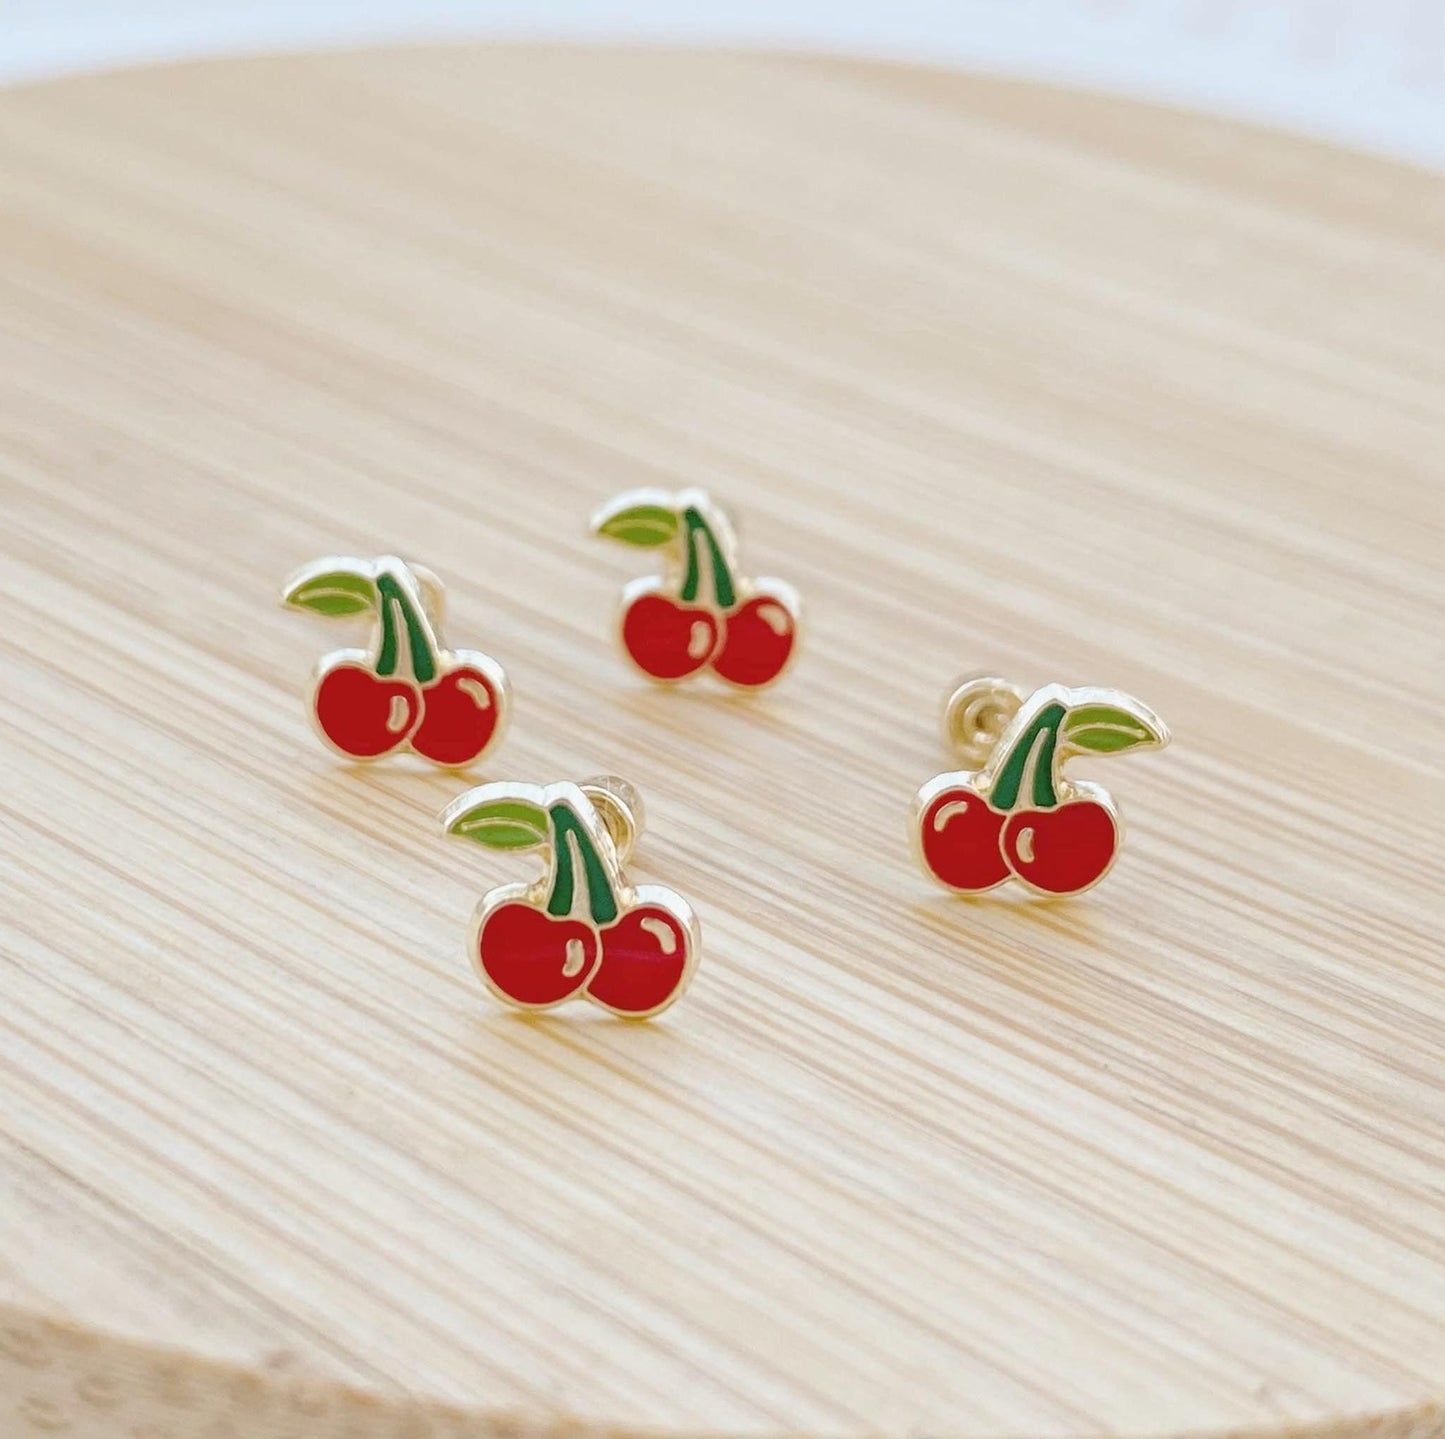 If you love cherries, you'll absolutely fall for these Dainty Cherry Stud Earrings! Our cherry earrings are handmade from authentic 10k gold, with each and every one of the tiny red gems being seen to do them justice. The screws backed backs give you a snug and secure fit, so these are perfect to sleep in or wear while lounging around the house.